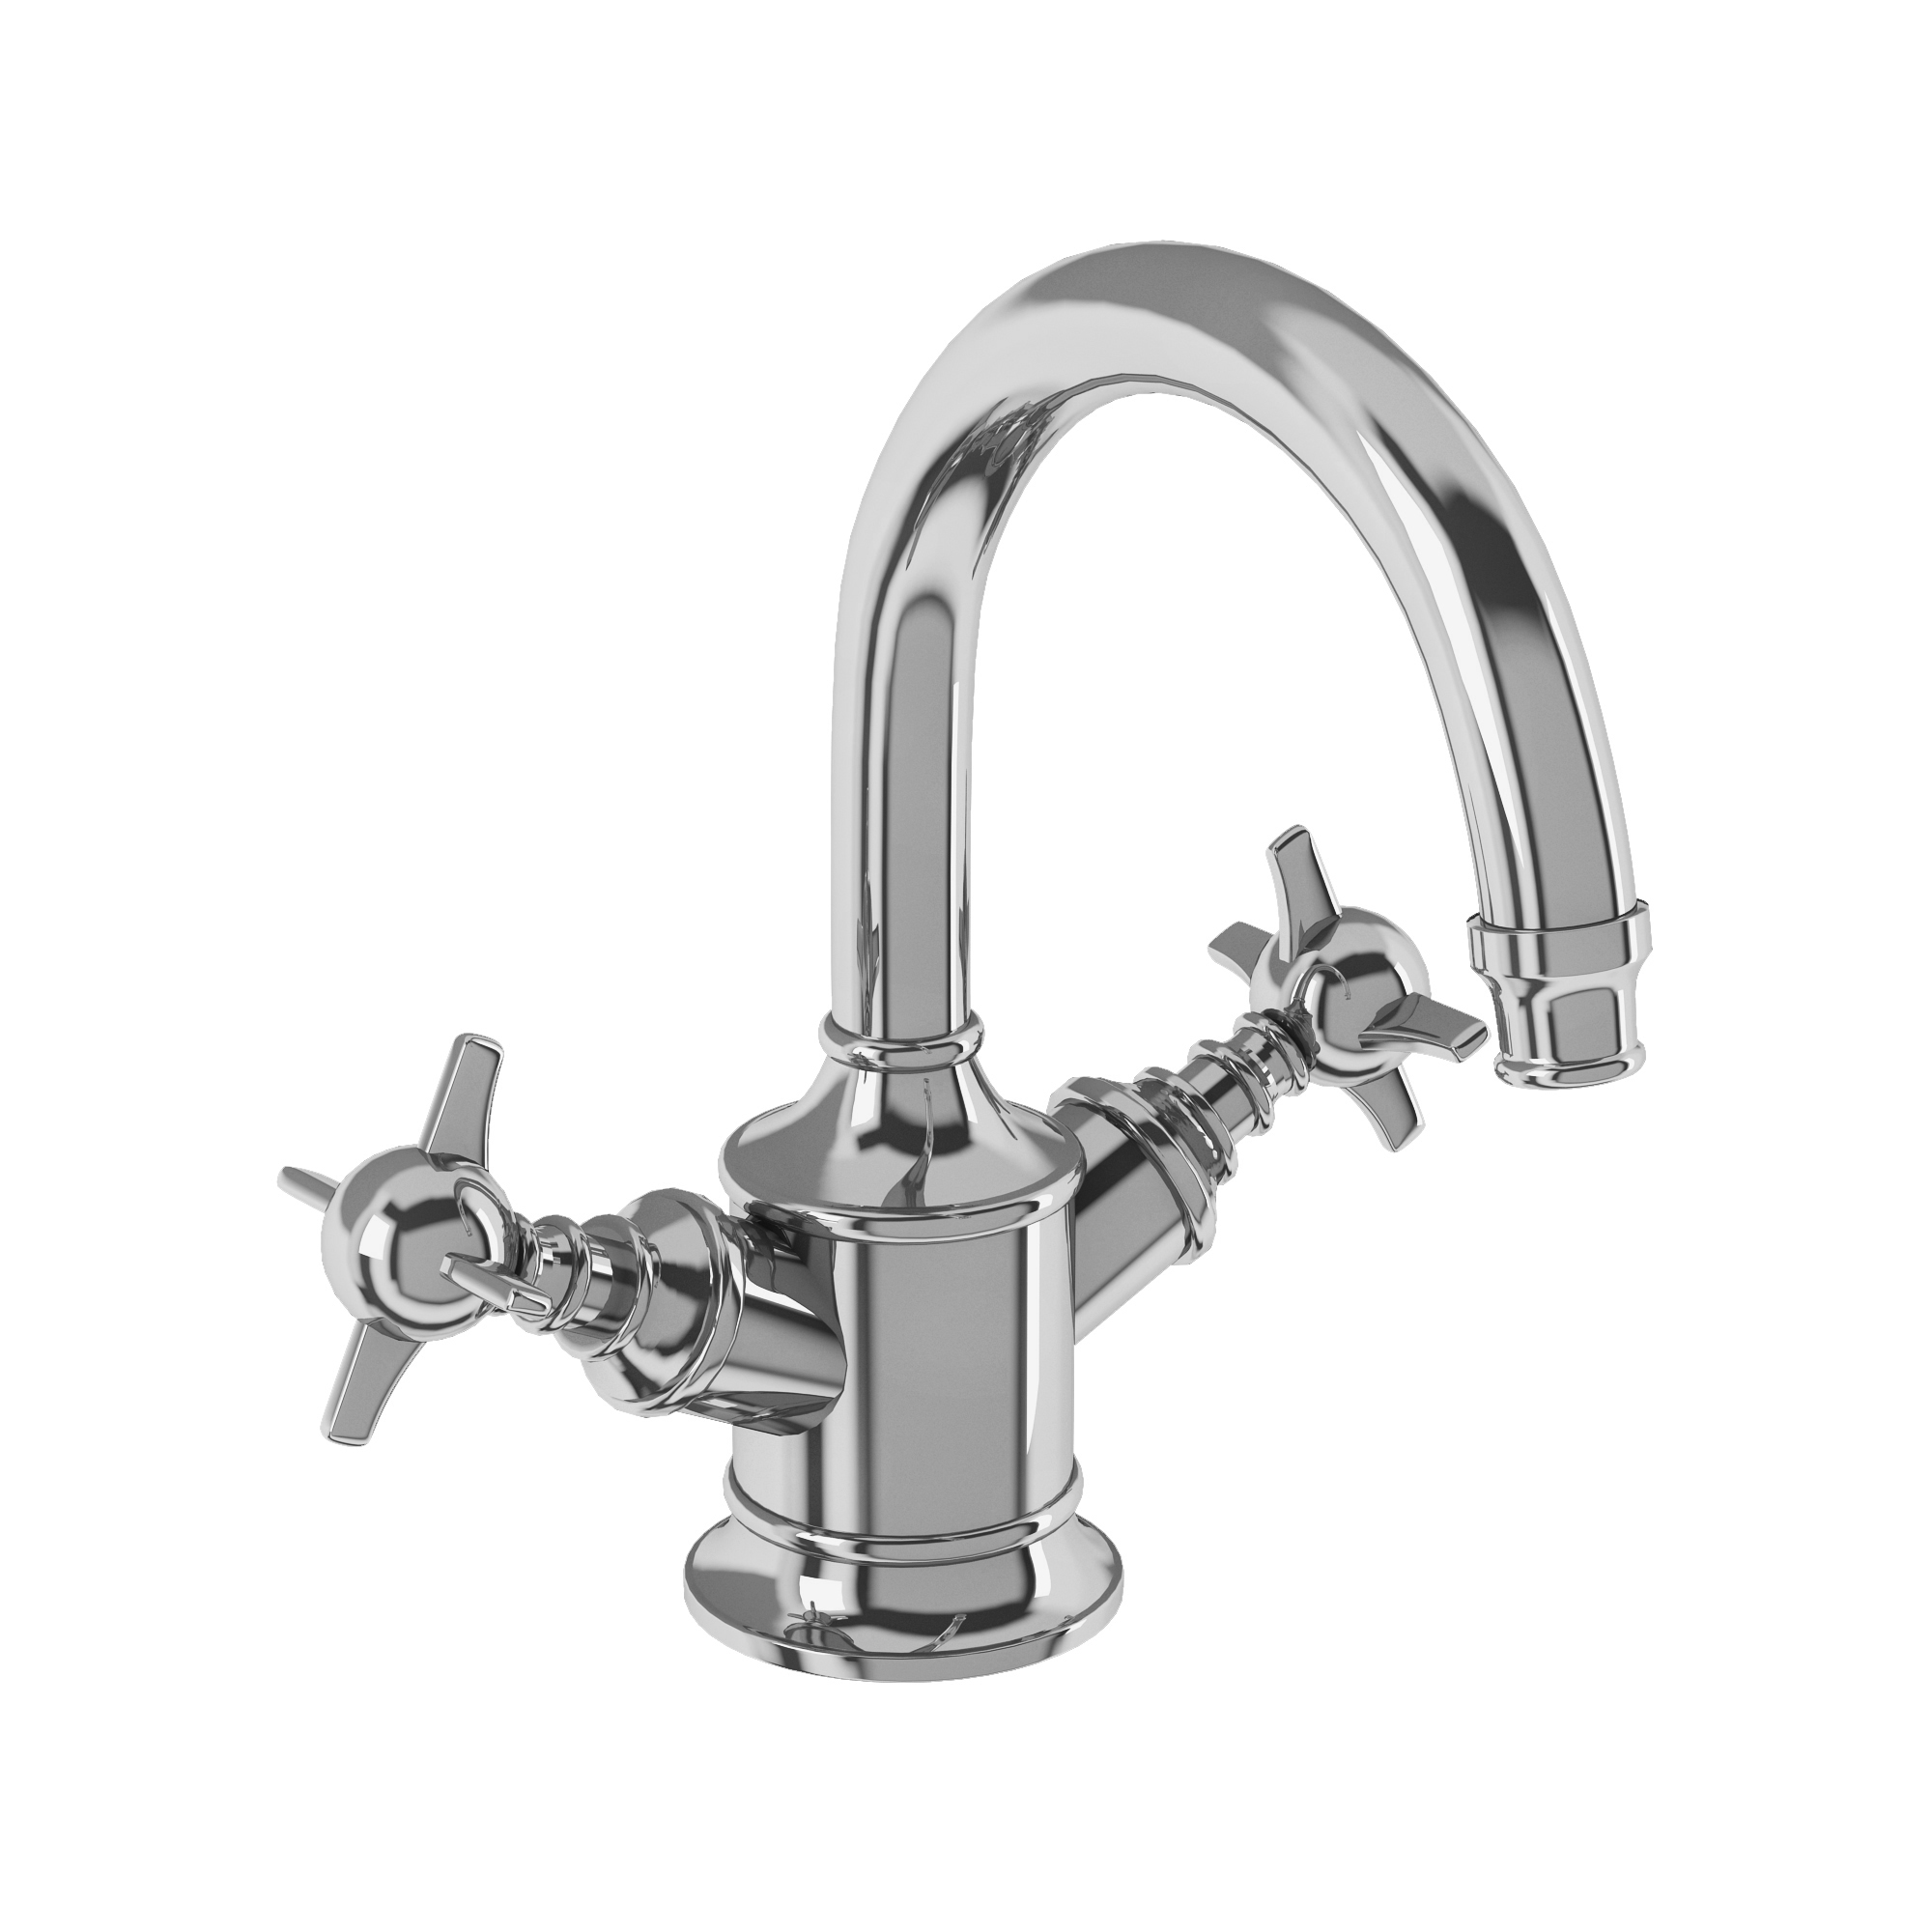 Arcade dual-lever basin mixer without pop up waste